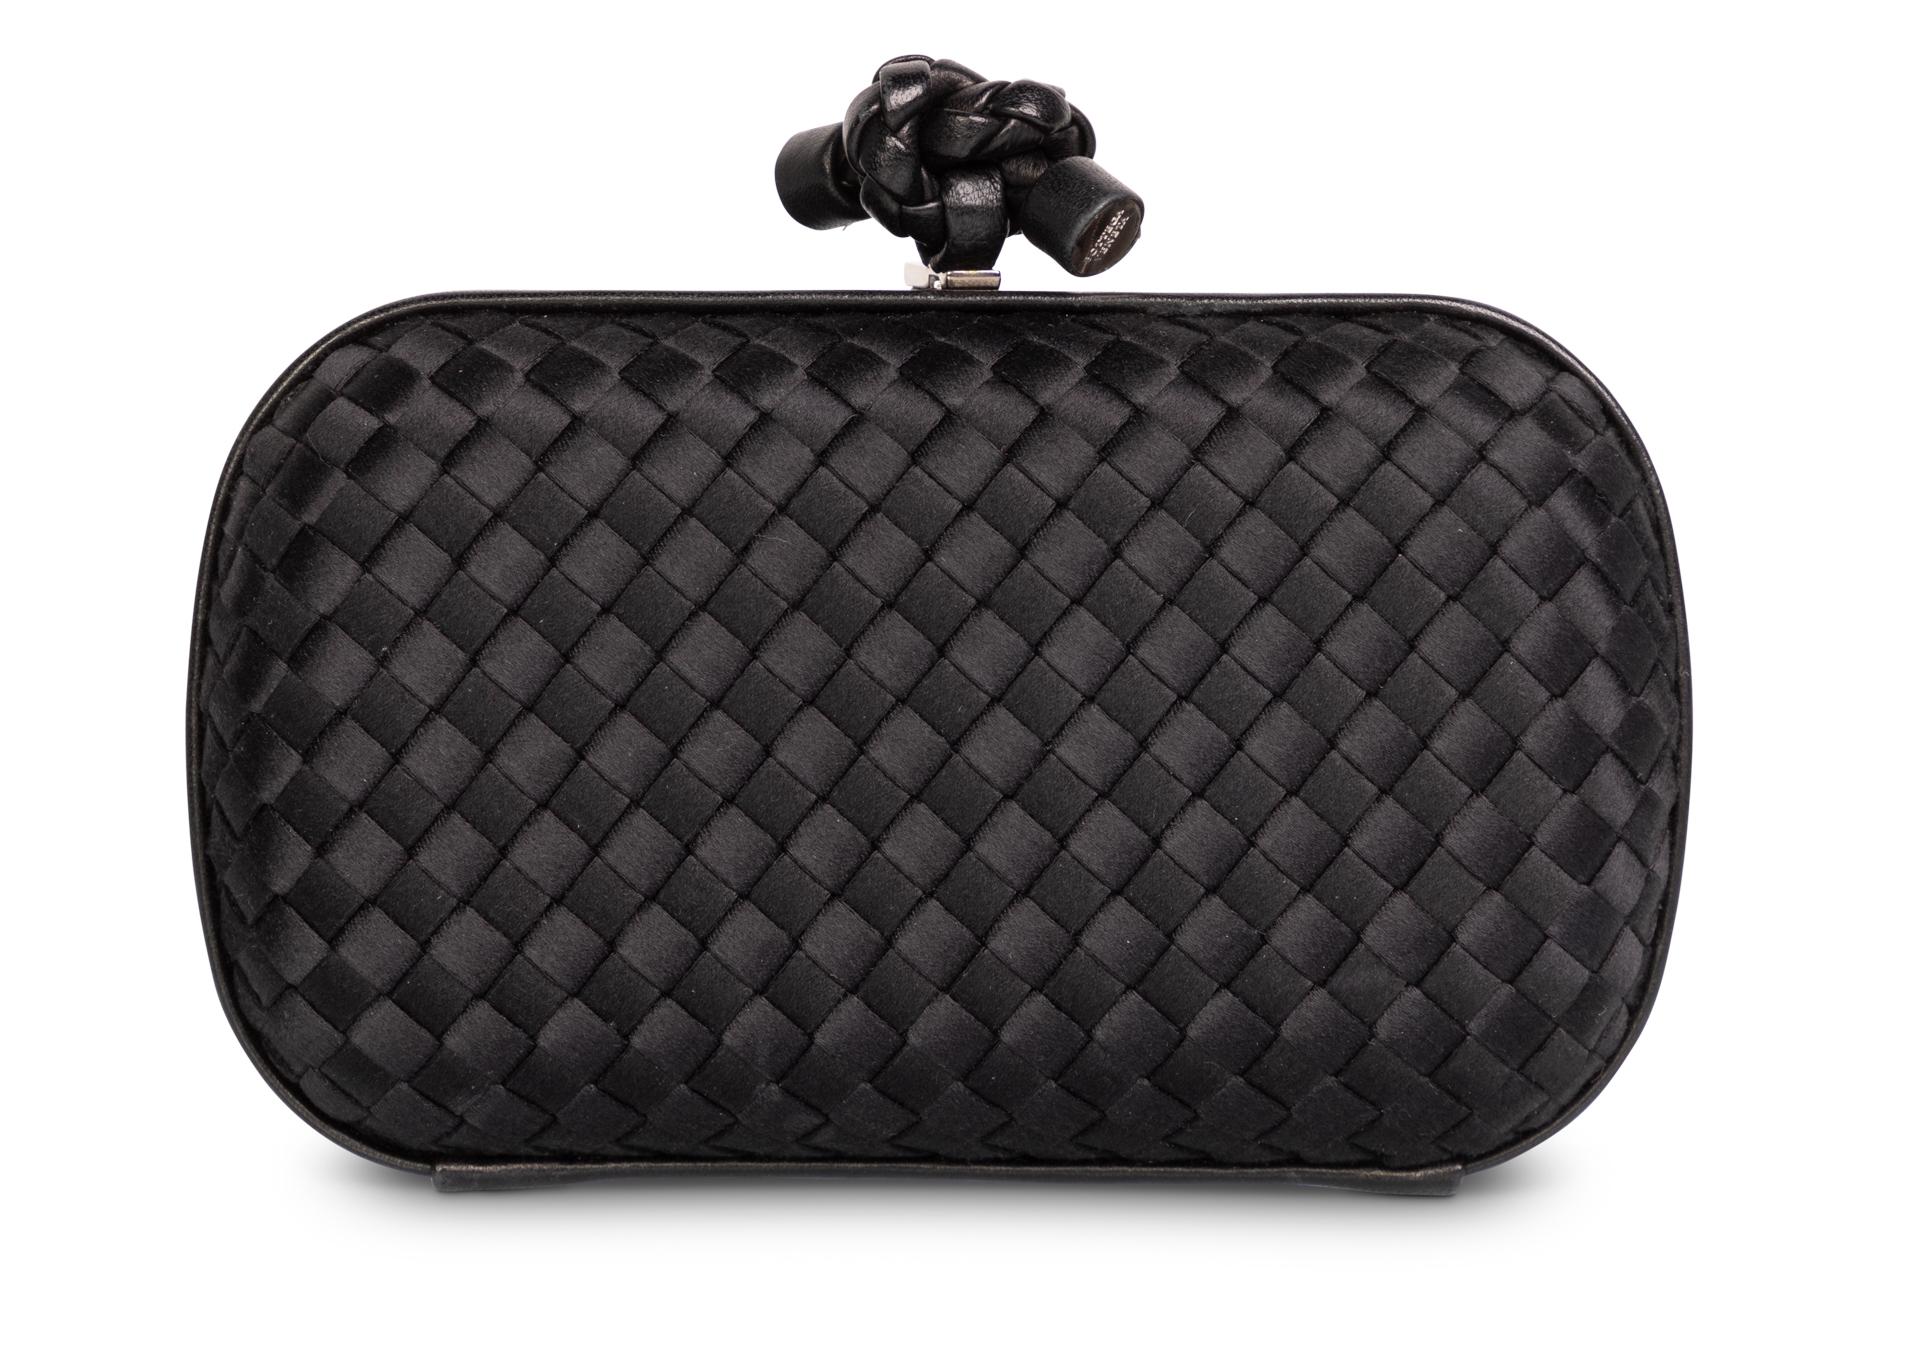 The Knot is one of Bottega Veneta’s most beloved handbags. The rounded hardshell box clutch, based on an archival shape and reintroduced in 2001, is a masterpiece of design and artisanal craftsmanship. Interpretations of the Knot have ranged from